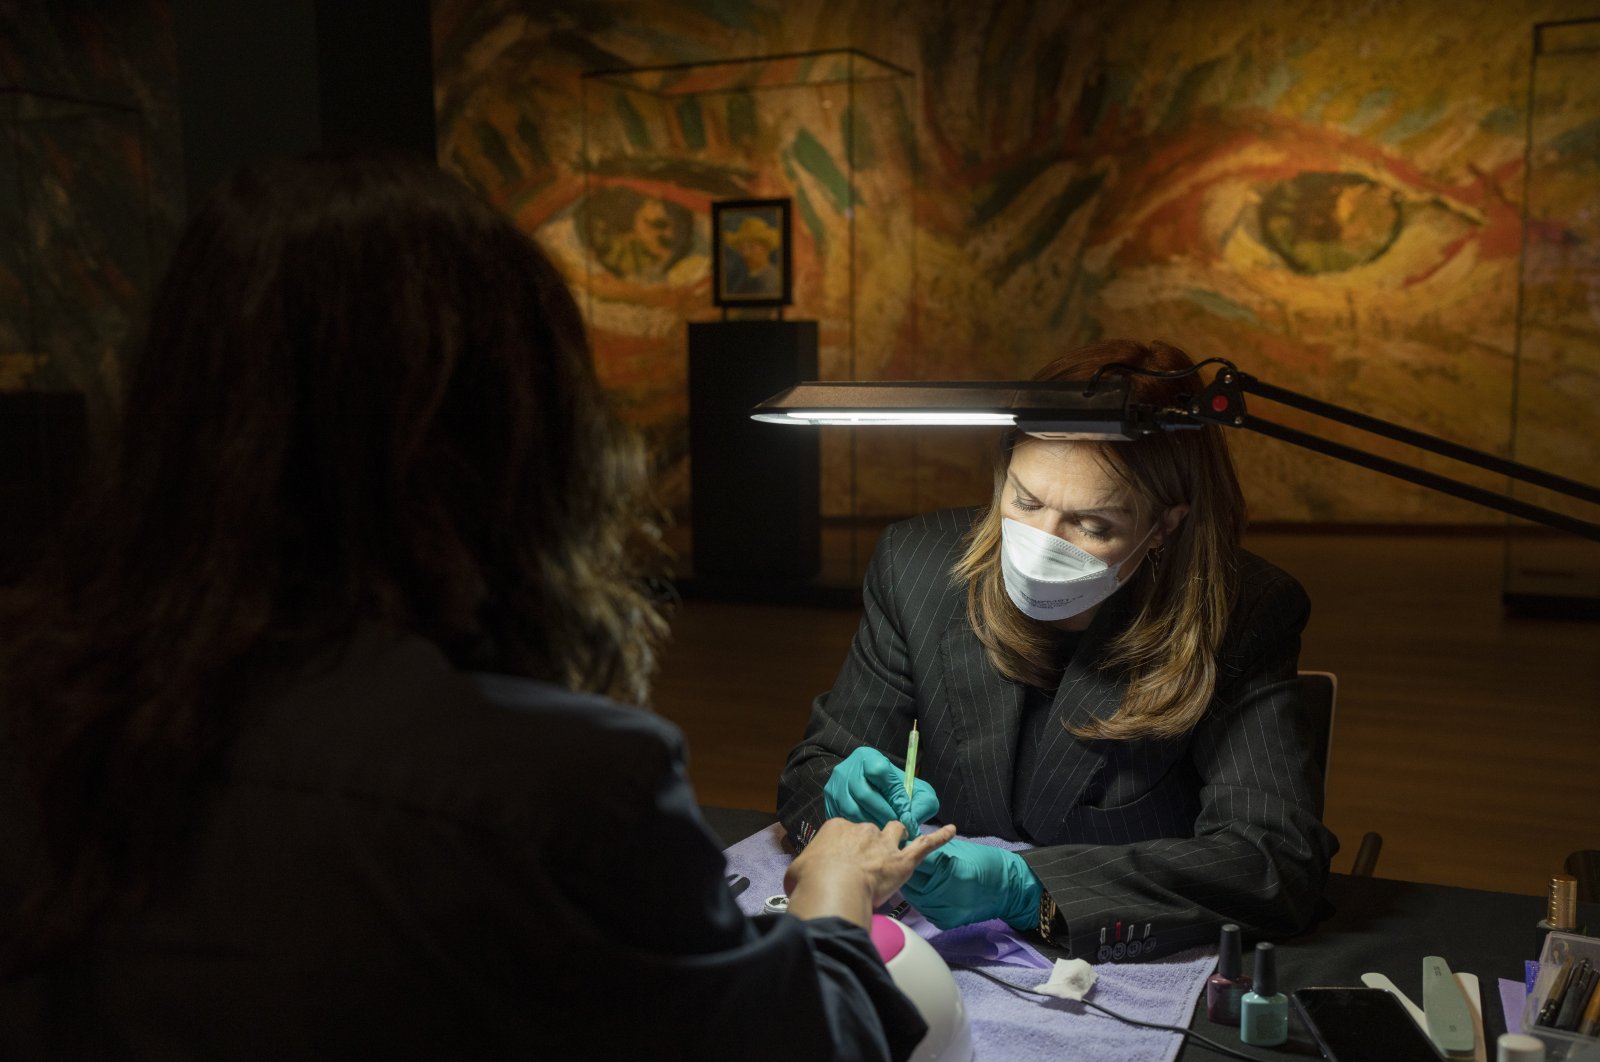 A woman gets a manicure at the Van Gogh Museum in Amsterdam, the Netherlands, Jan. 19, 2022. (AP Photo)